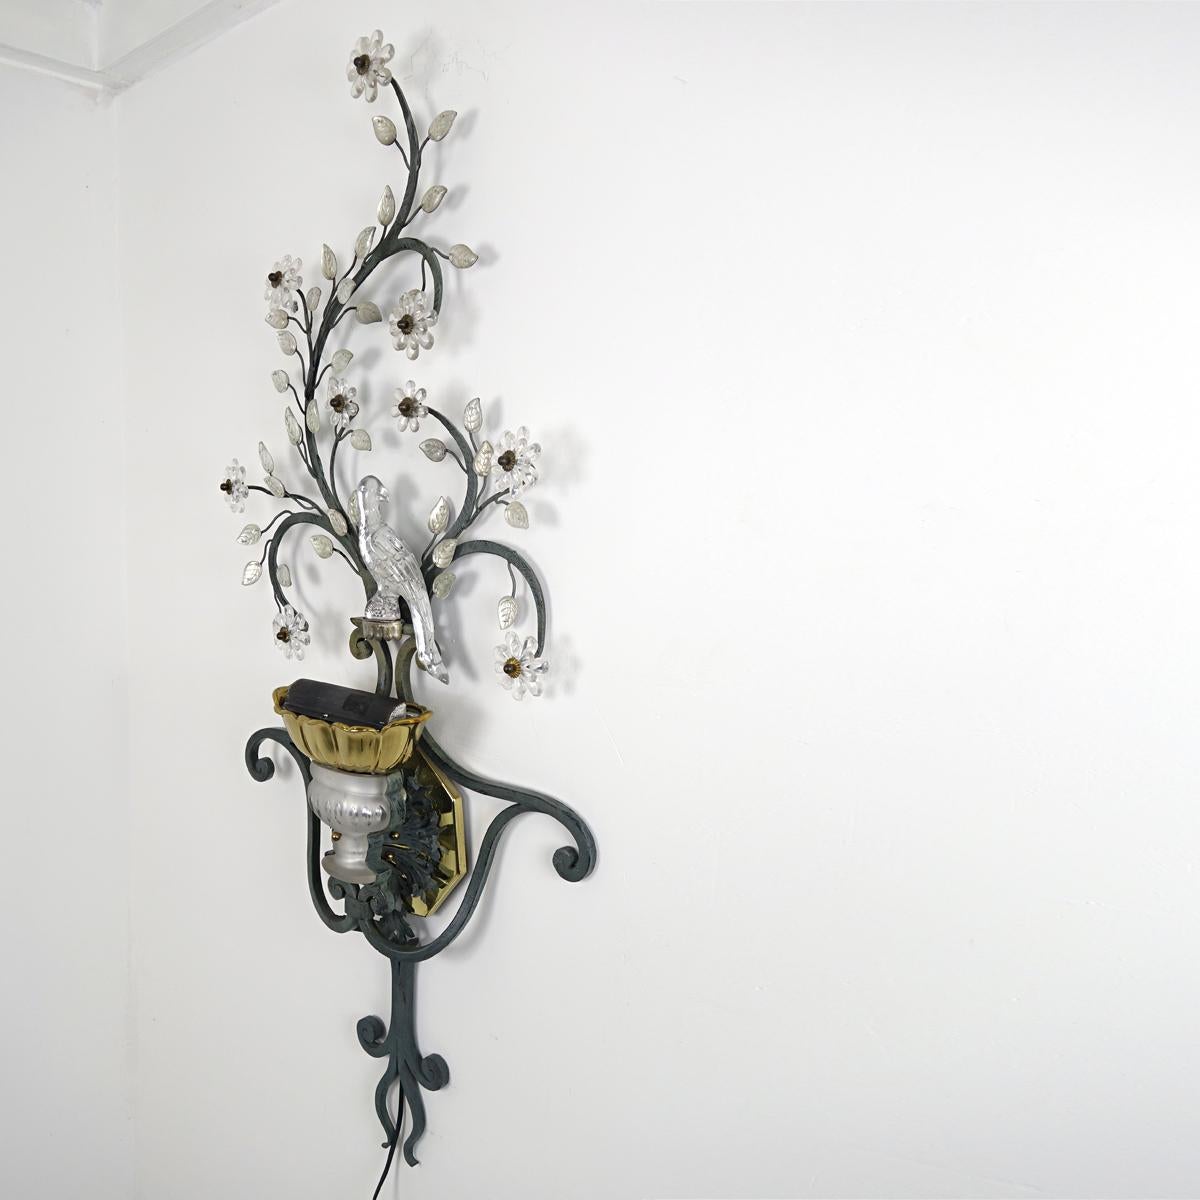 Impressively large Italian sconce with a crystal bird, flowers and leaves. 
The internal bulb provides for a warm up-light.
      